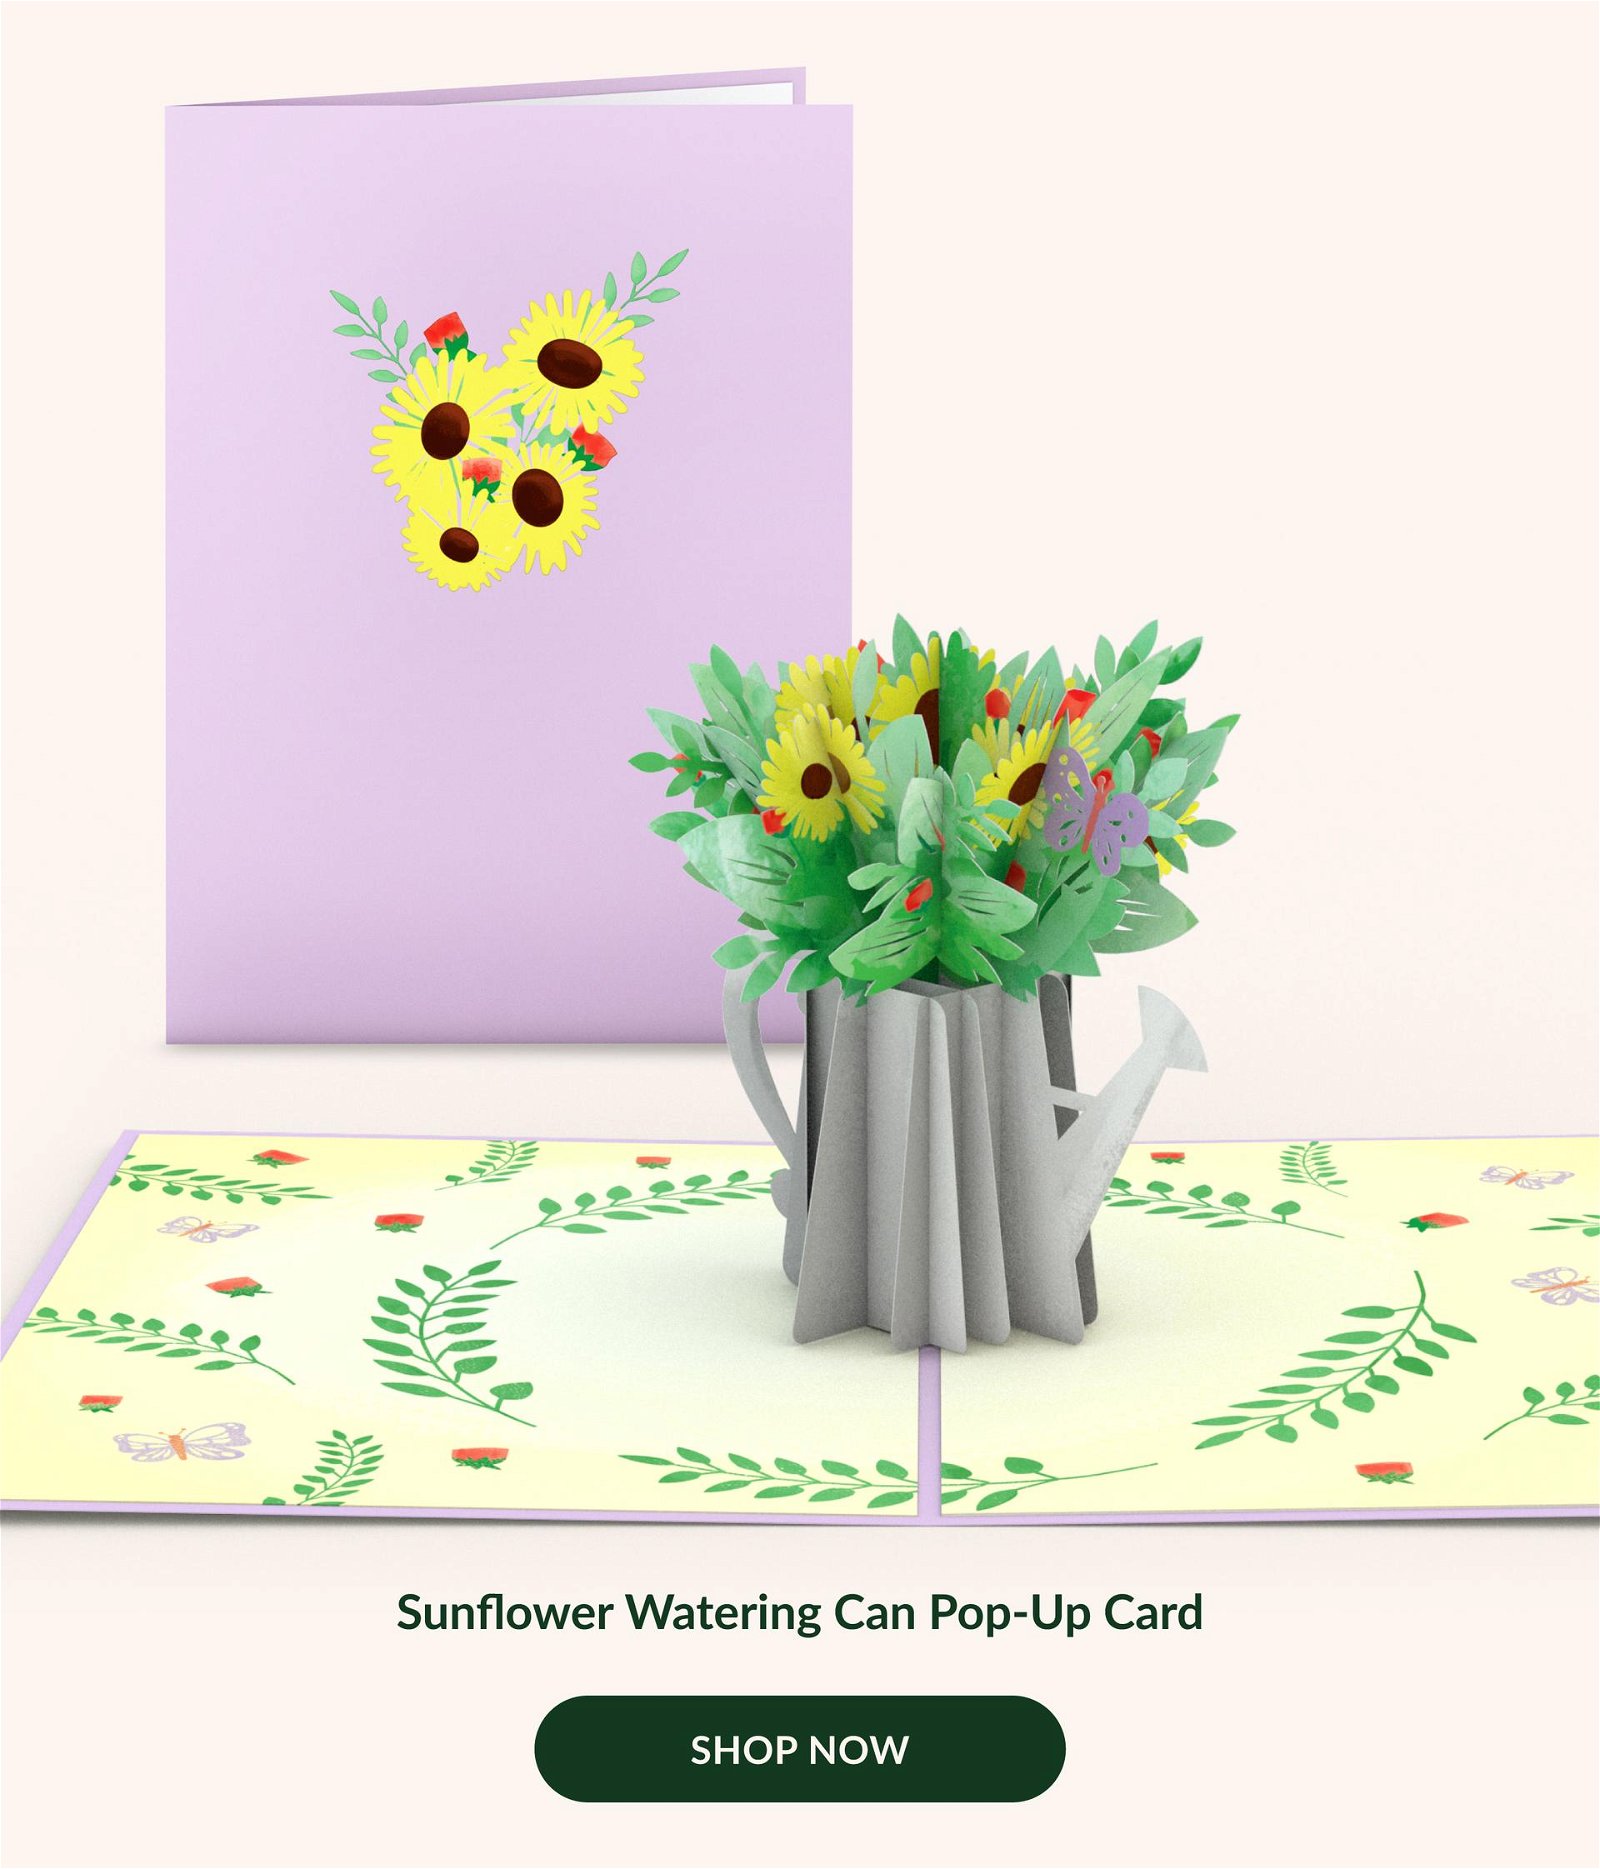 Sunflower Watering Can Pop-Up Card | SHOP NOW